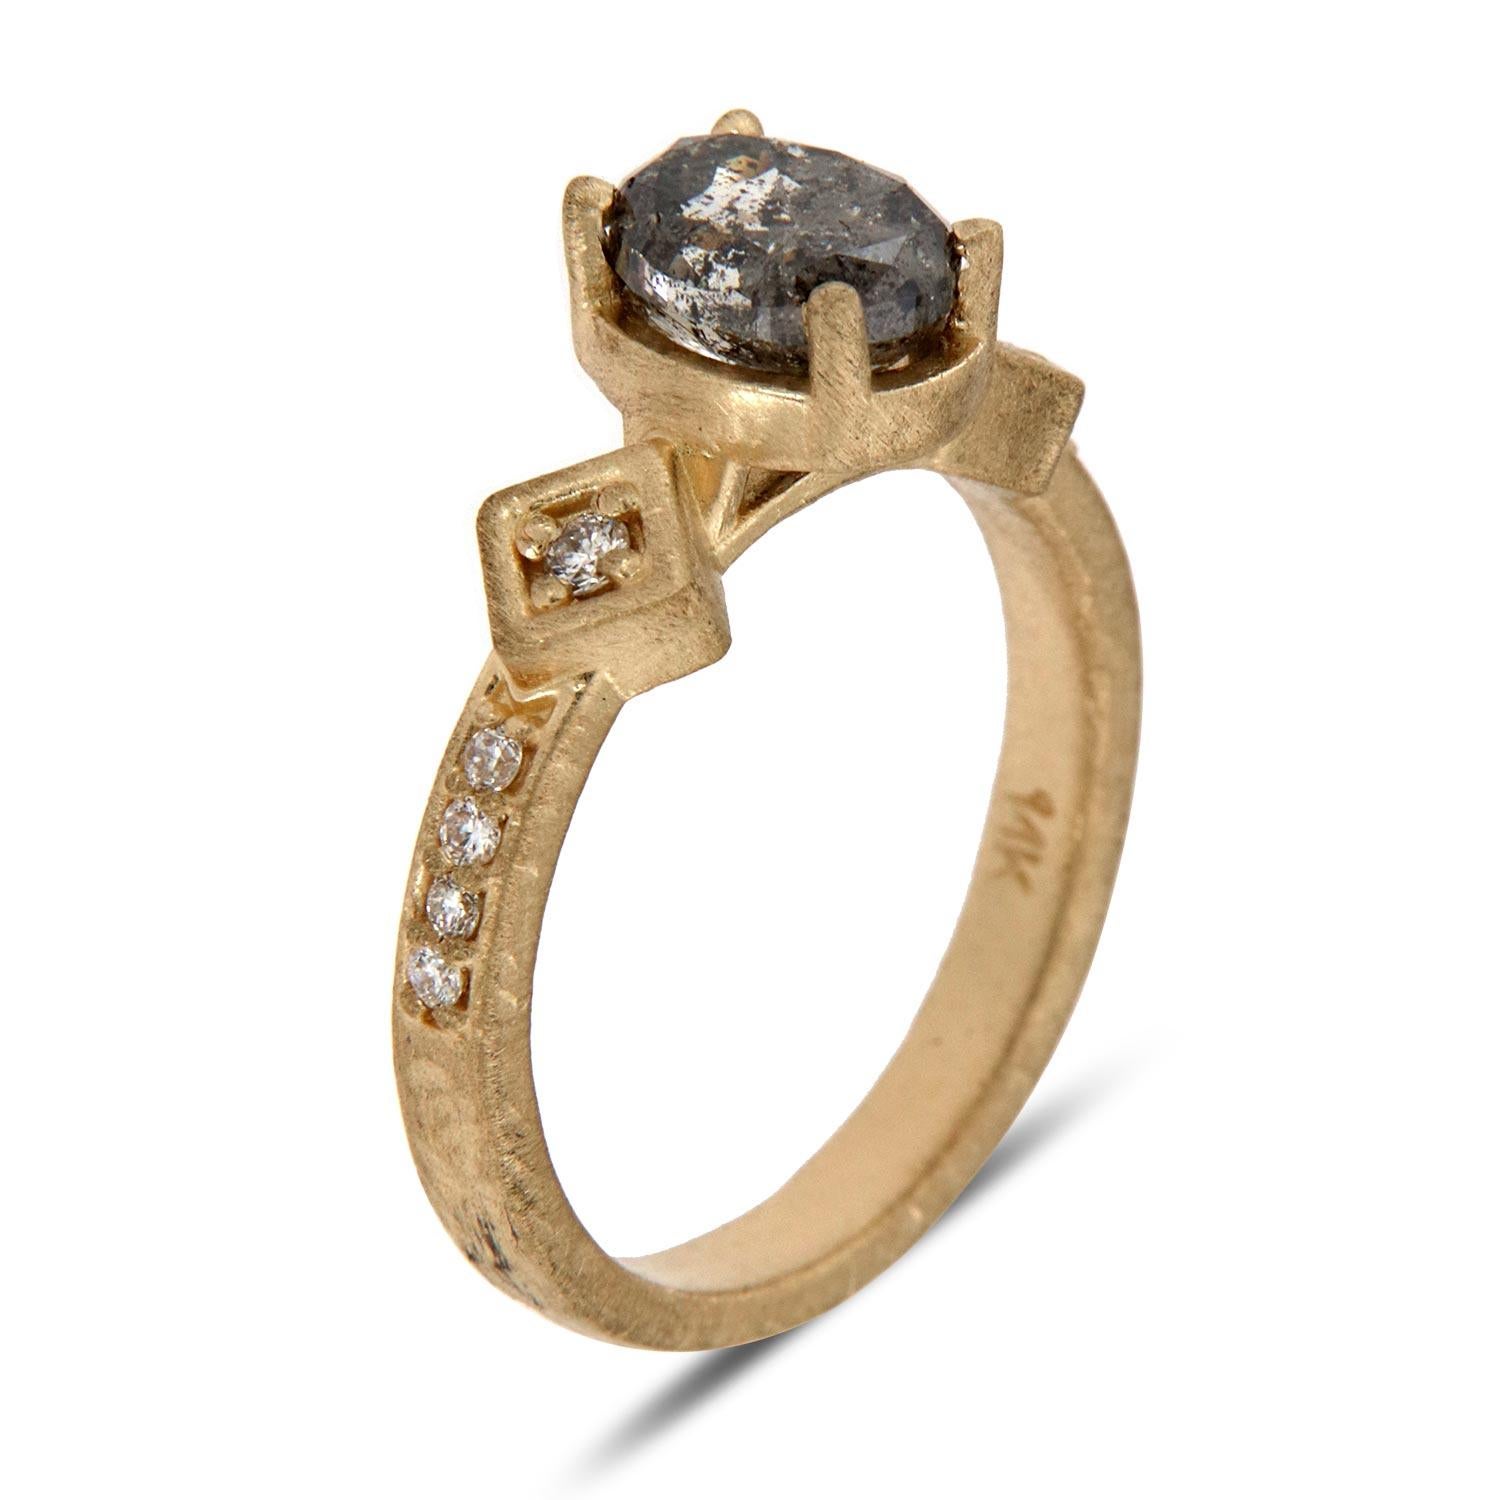 This Earthy design ring features Ten (10) Round brilliant diamonds prong set on a 2.3 mm matte-finished shank. In the center of the ring is set a 1.44 Carat Oval shaped natural Salt & Pepper diamond. The unique texture that we applied to the band